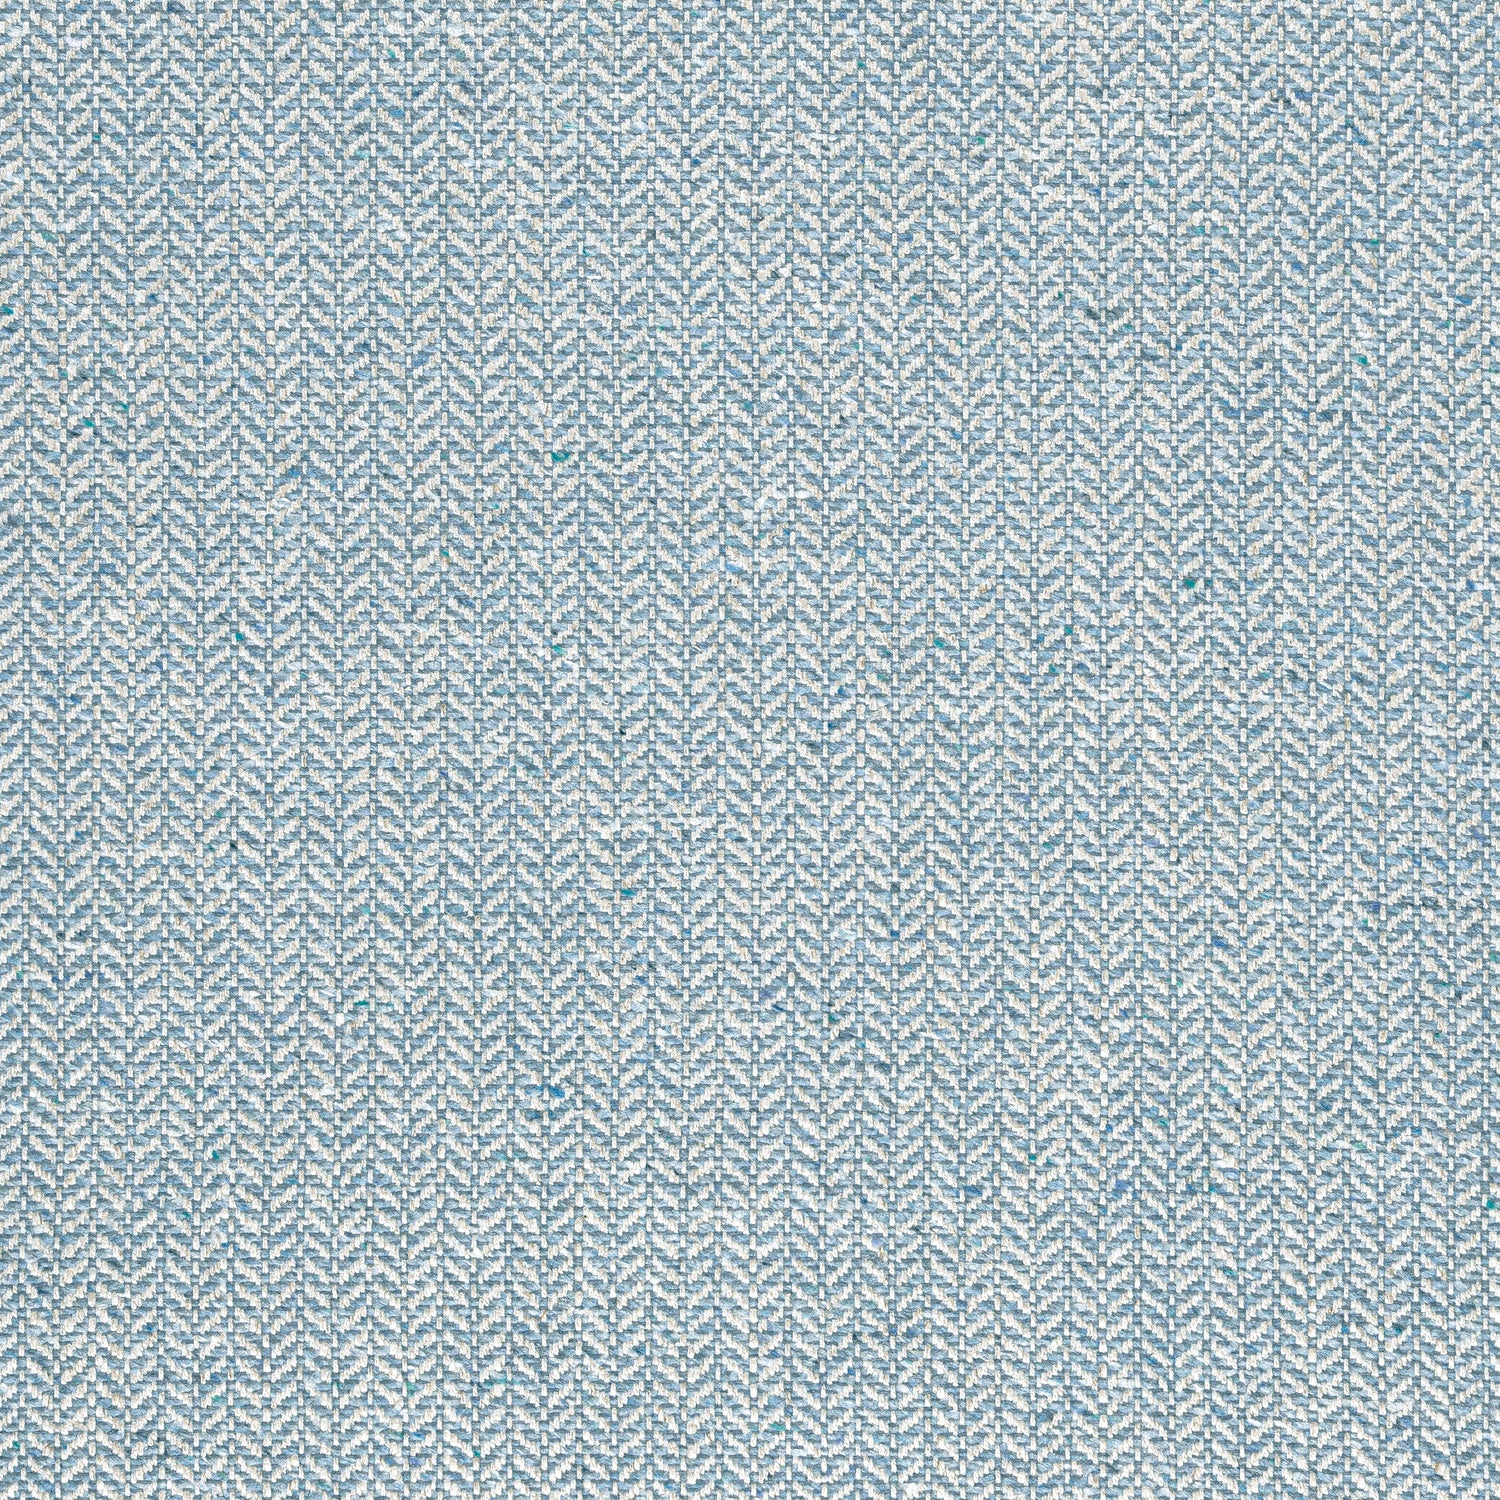 Heath fabric in waterfall color - pattern number W80923 - by Thibaut in the Dunmore collection